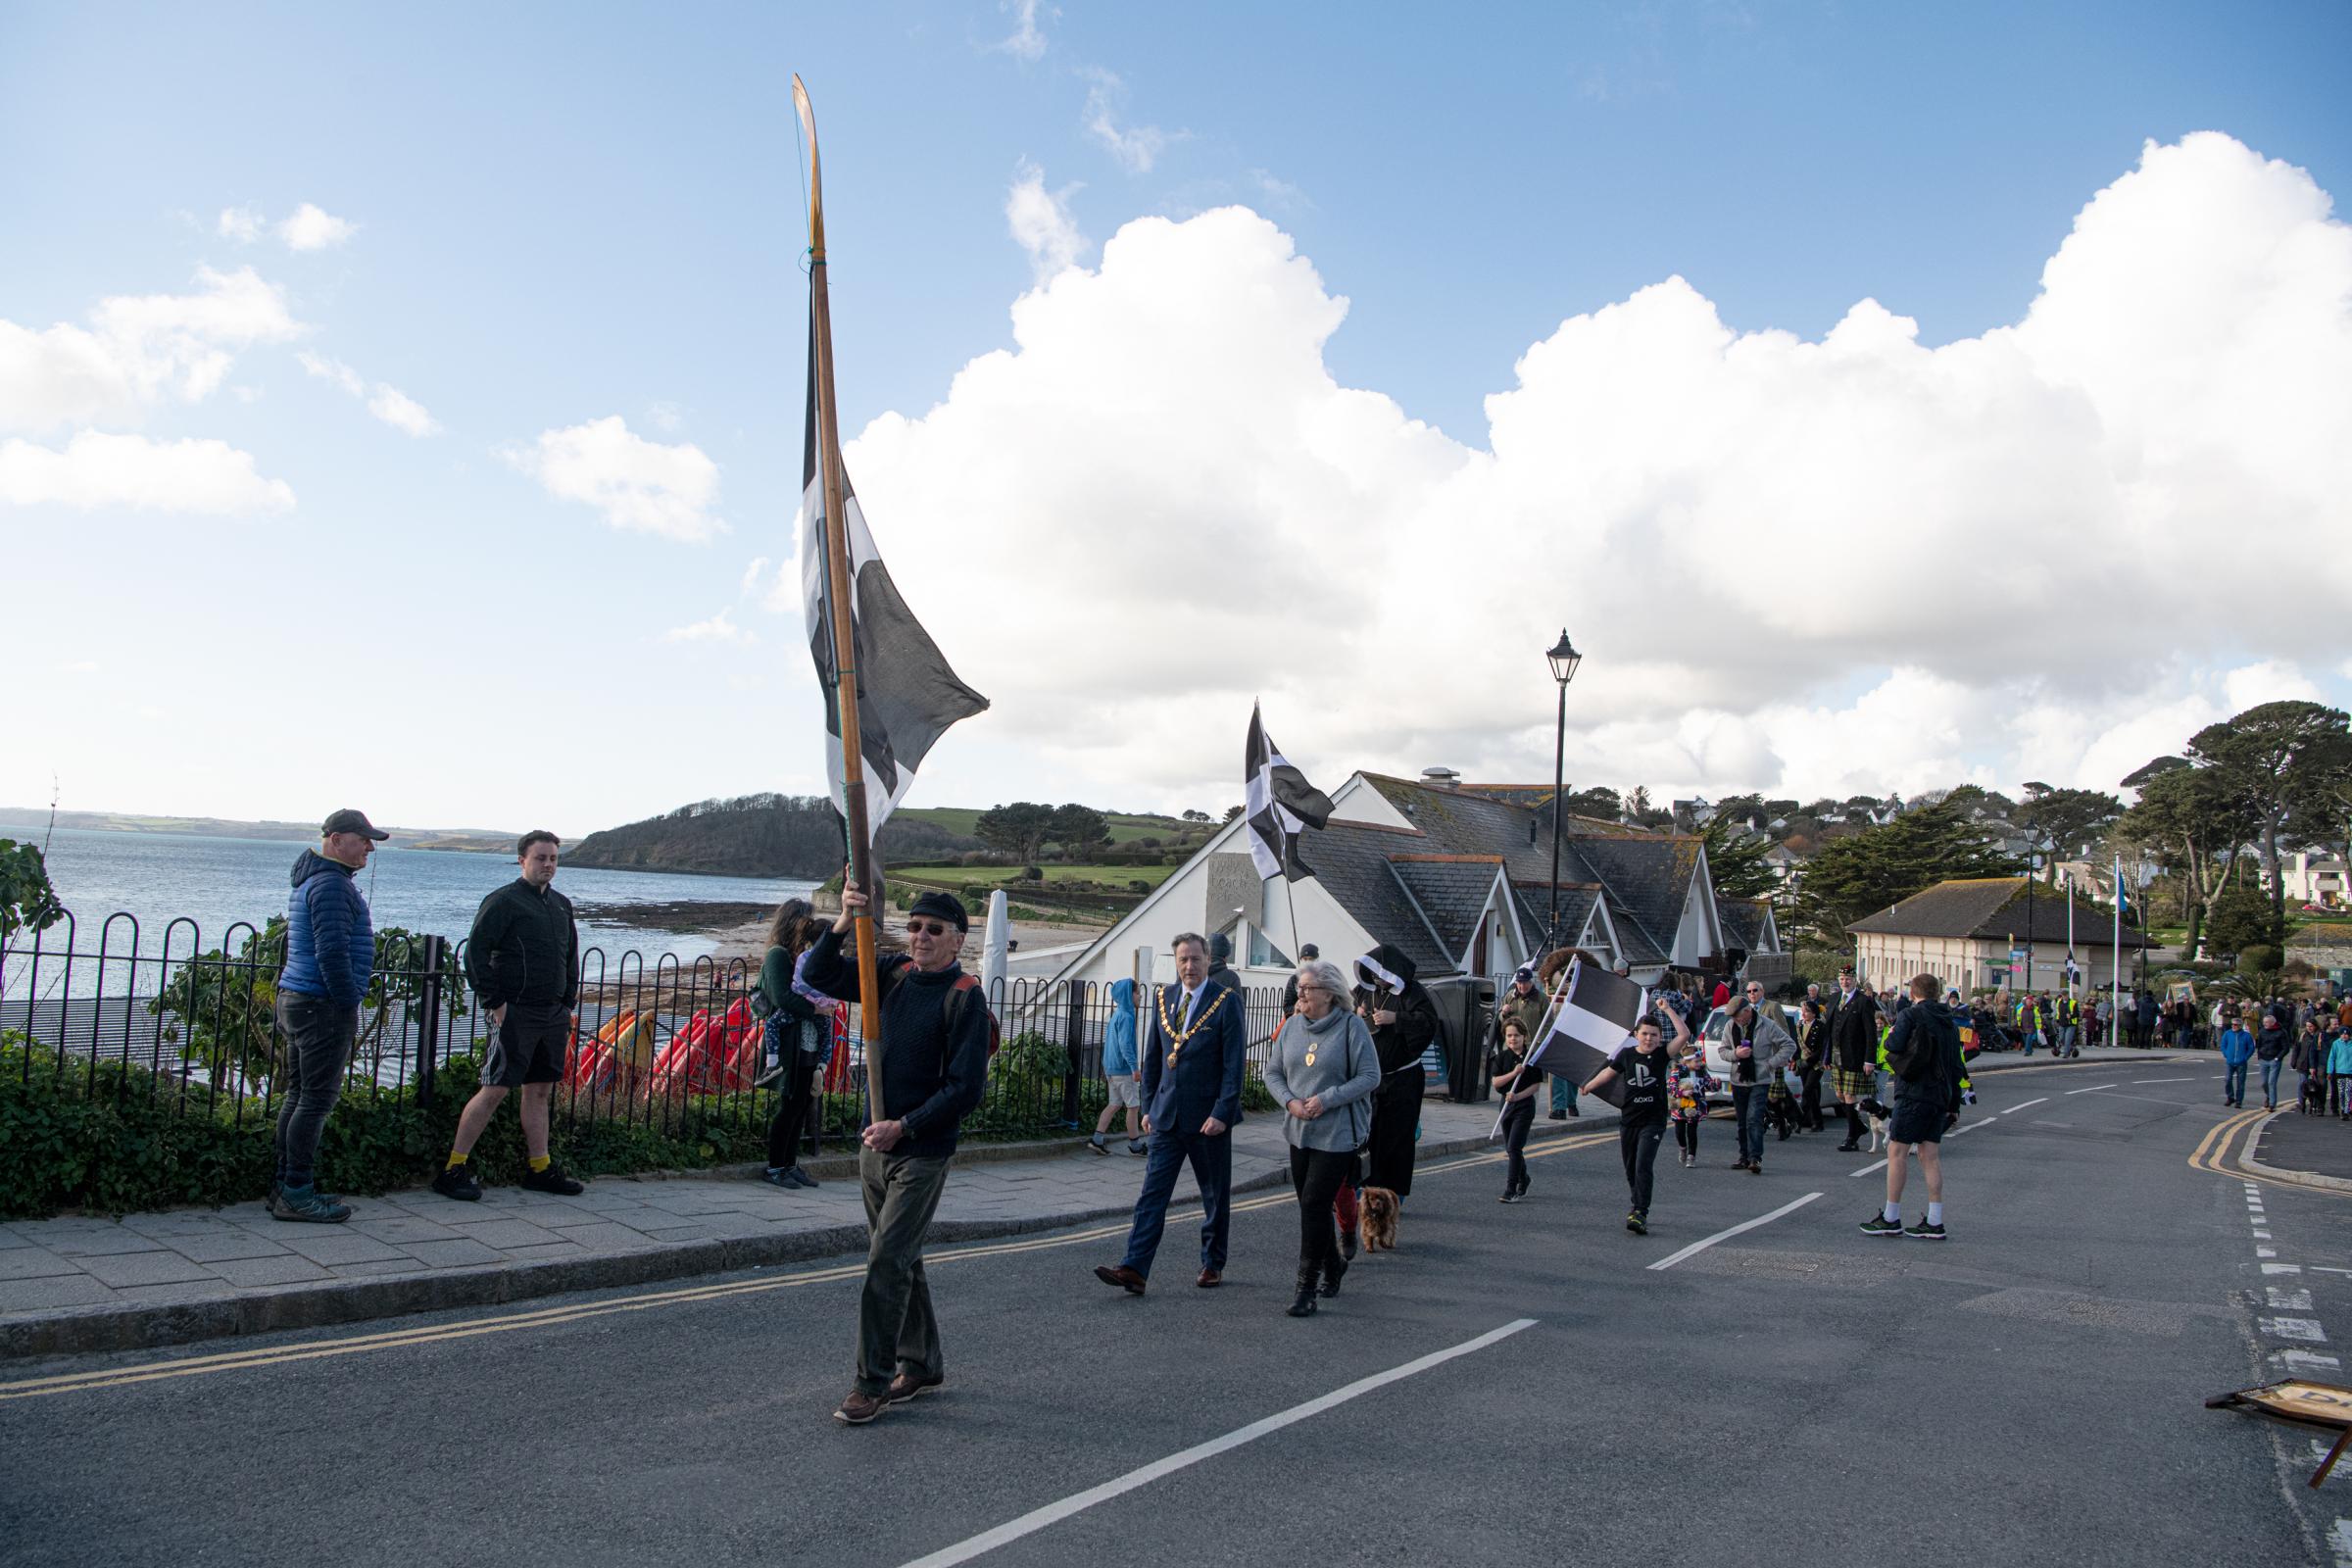 The St Piran flag was carried at the head of the parade